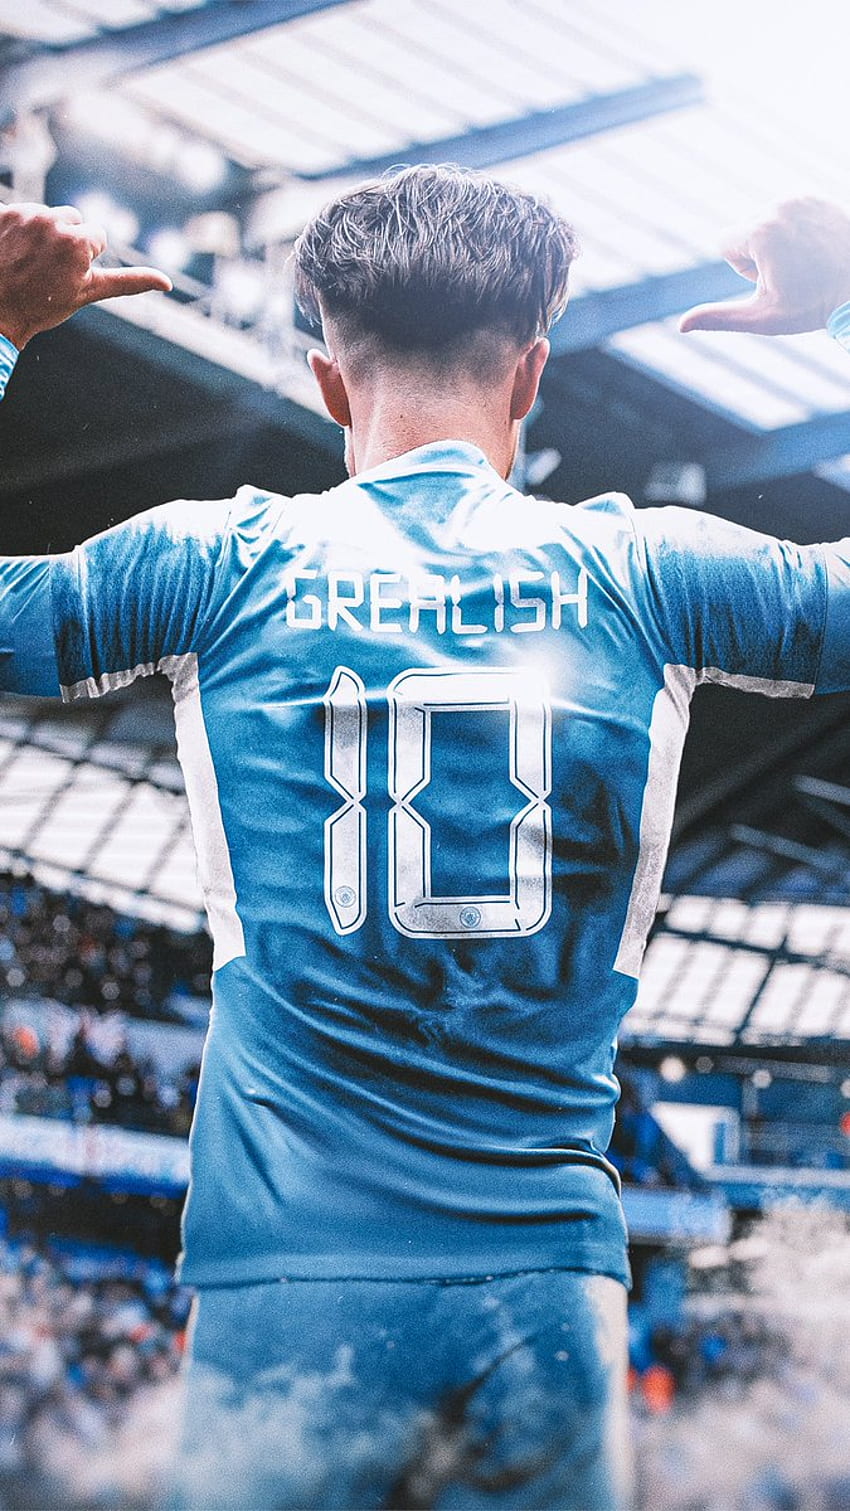 29909 Jack Grealish HD, Manchester City F.C. - Rare Gallery HD Wallpapers